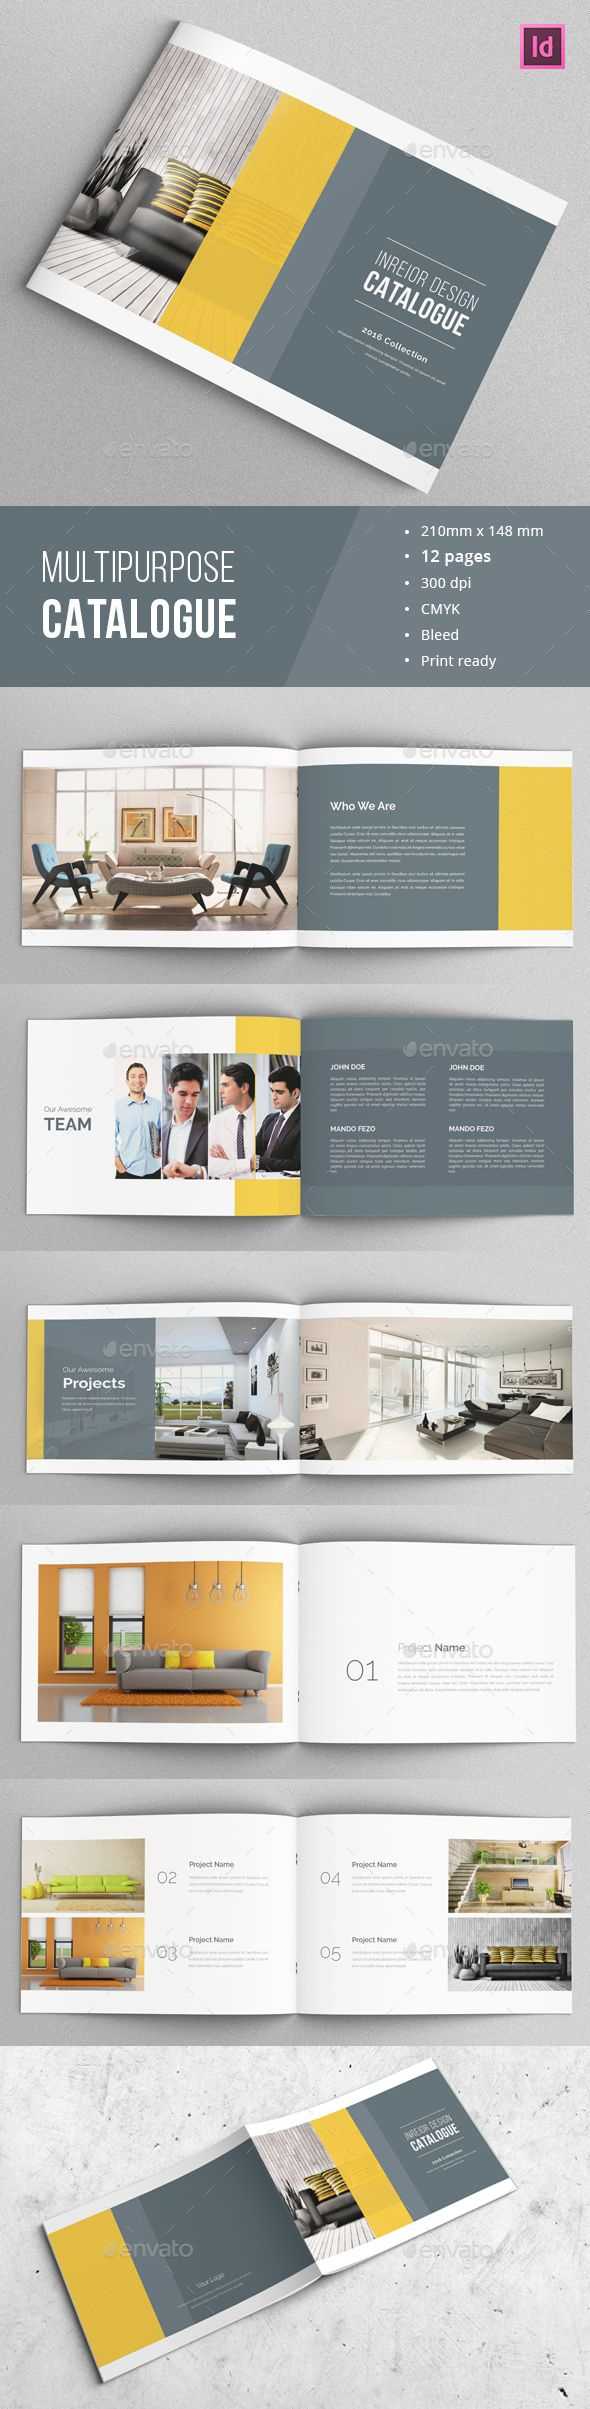 Multipurpose Brochure / Catalogue Template This Is 12 Page Regarding 12 Page Brochure Template